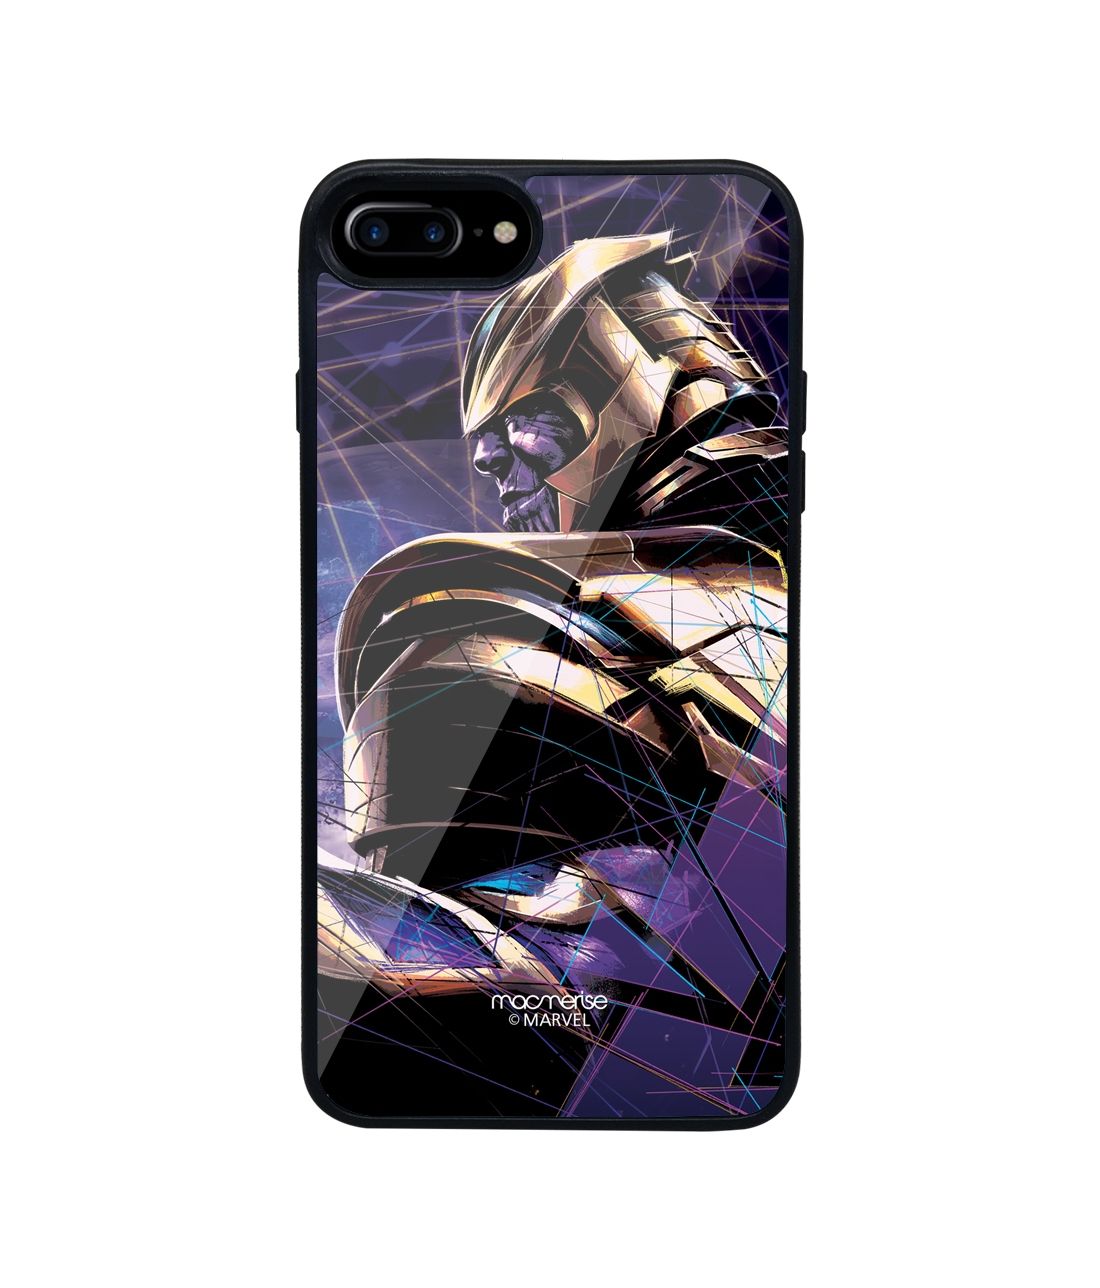 Thanos on Edge - Glass Phone Case for iPhone 7 Plus